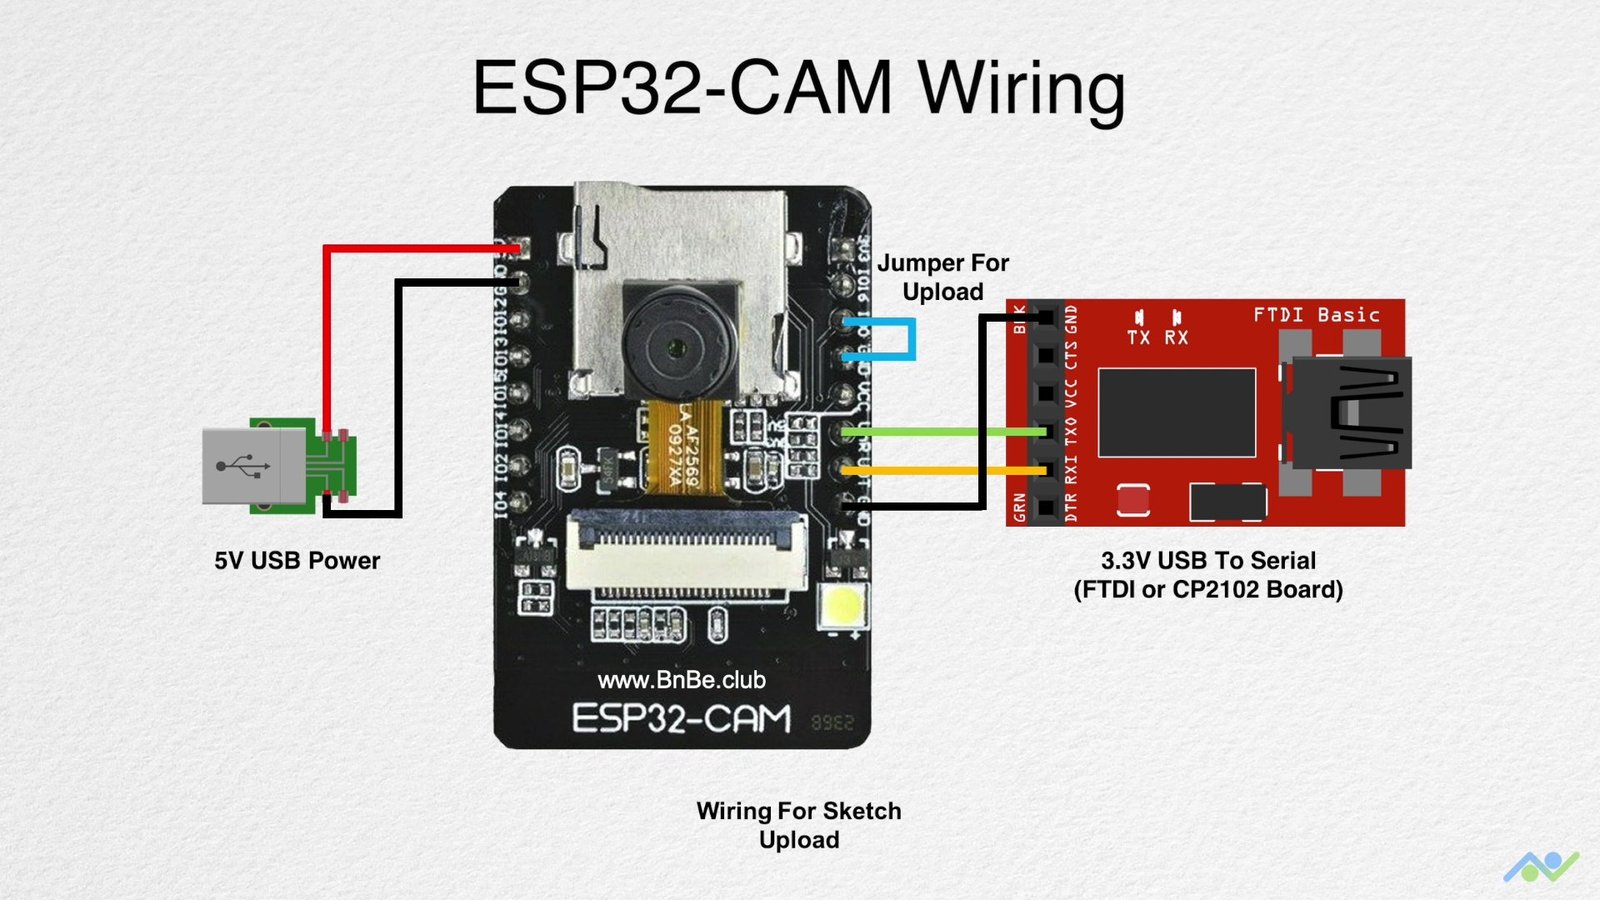 ESP32 CAM connections with FTDI cable